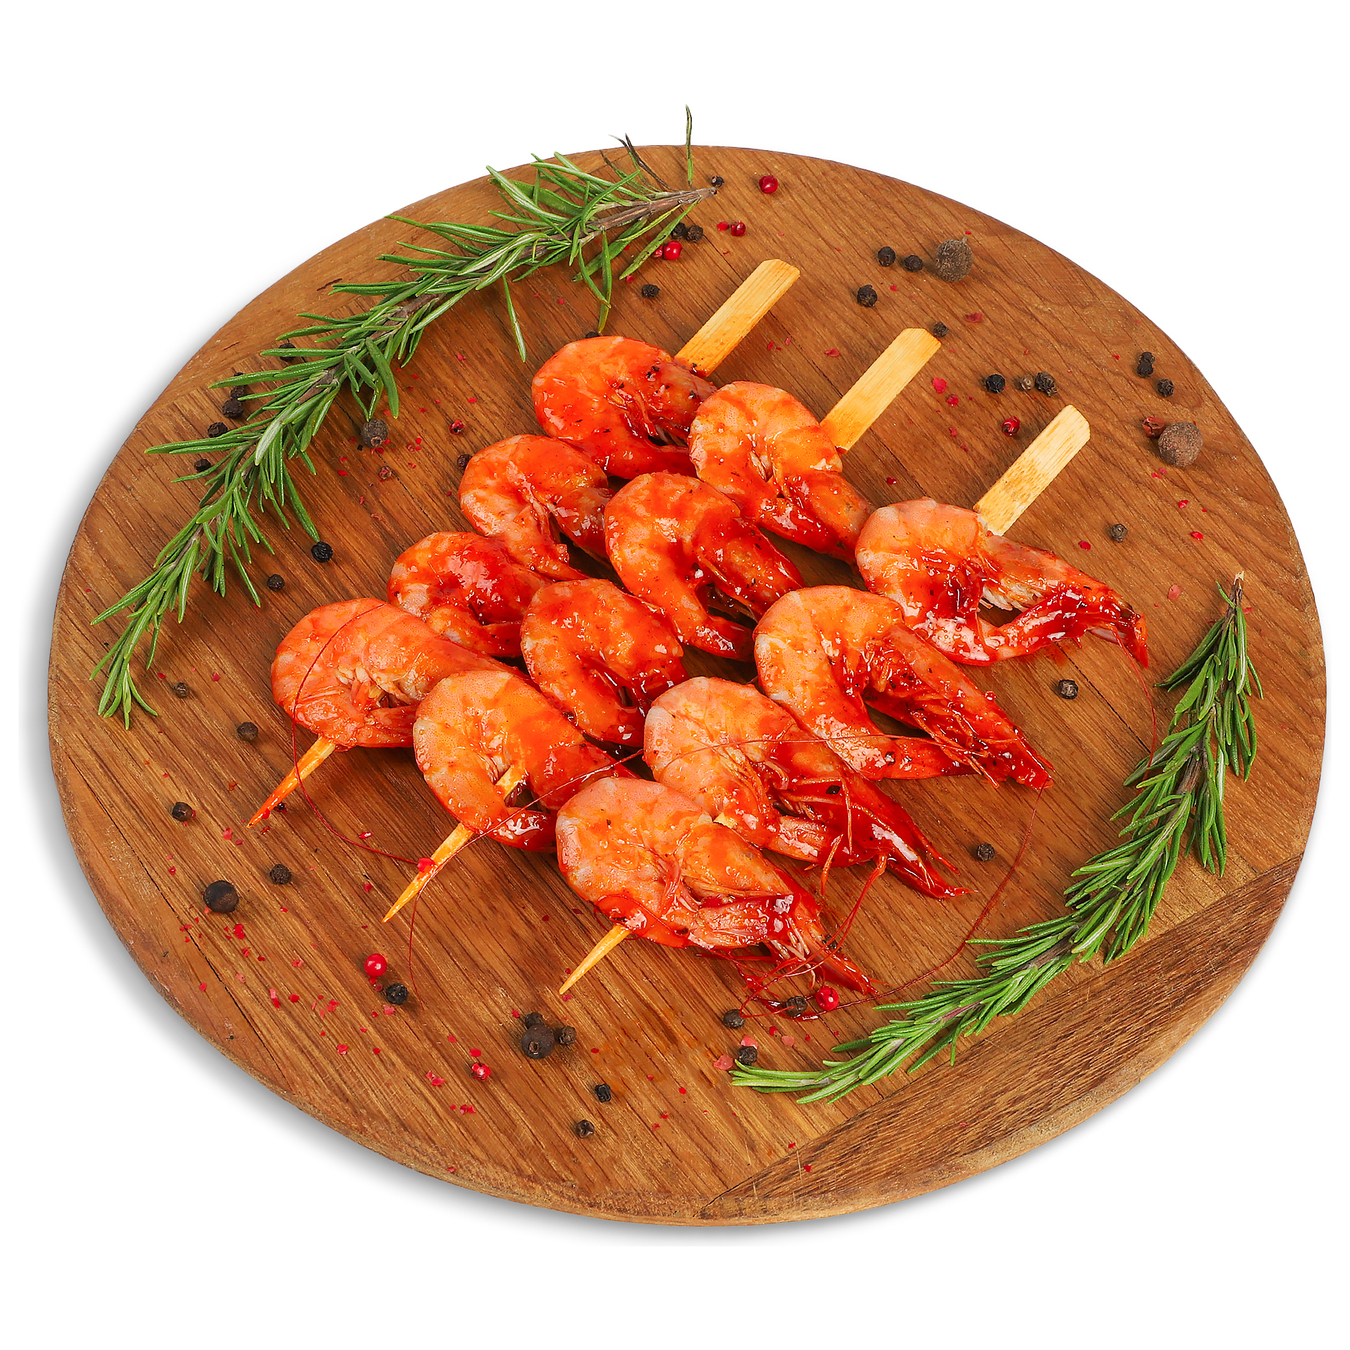 Shrimp on skewers for grilling weights